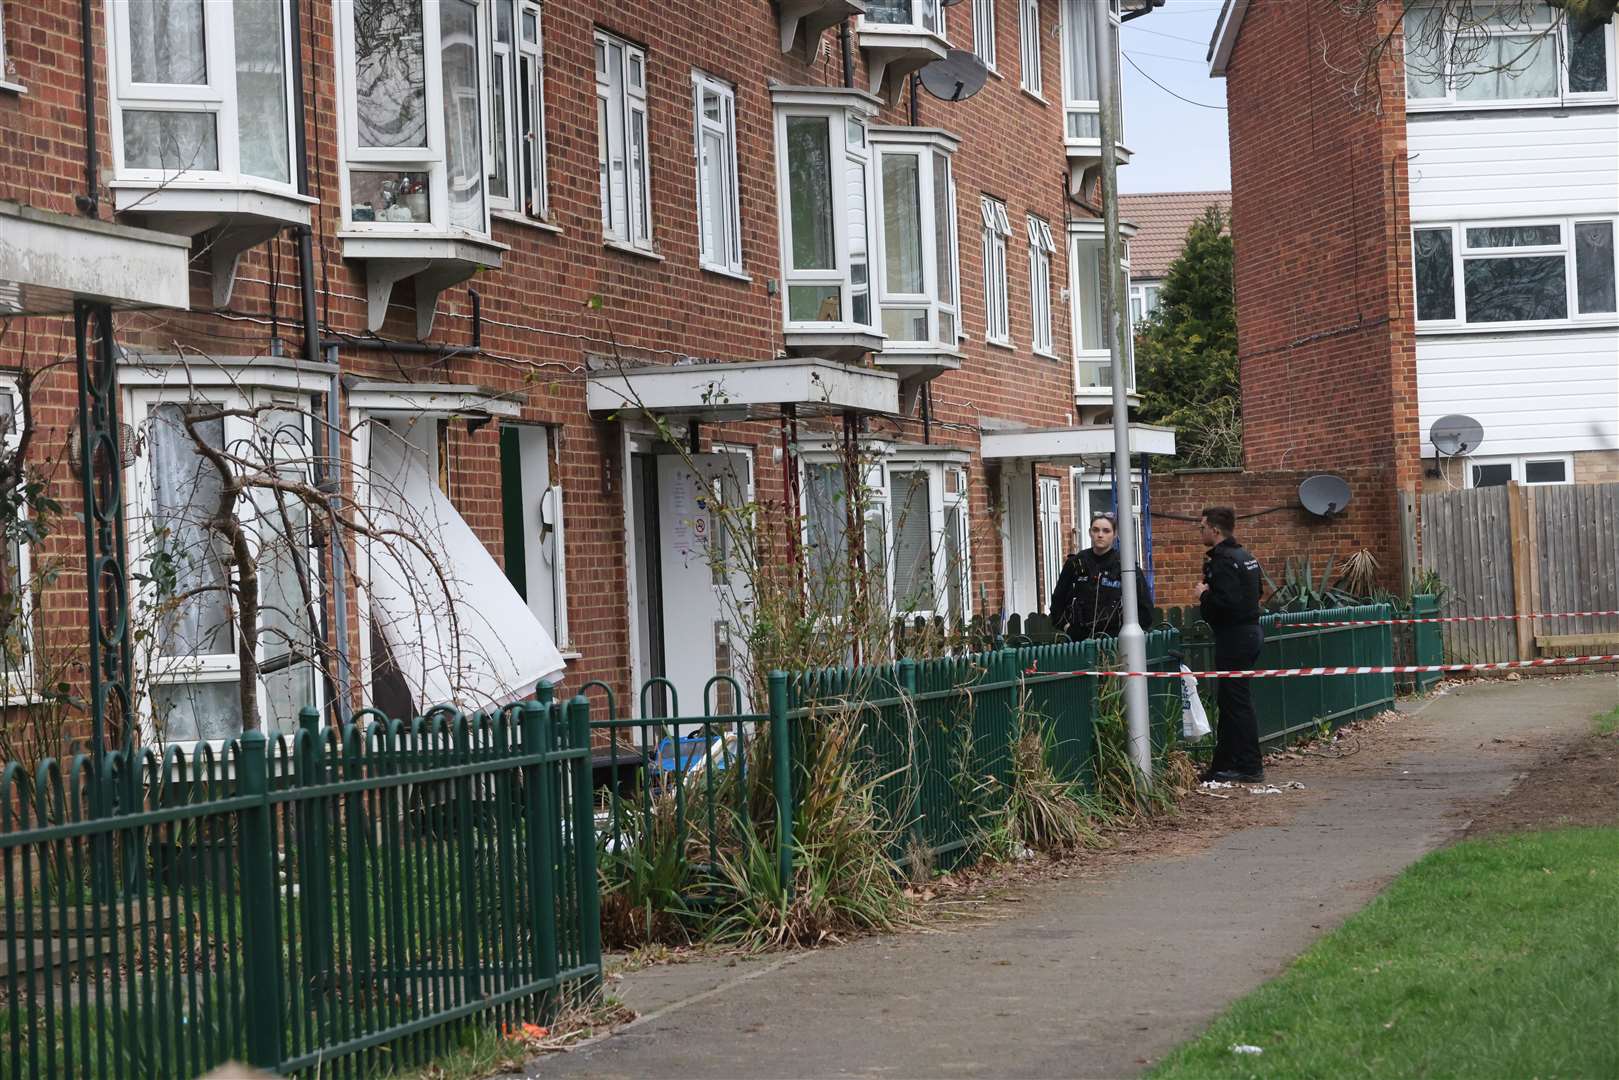 A police cordon remains in place around a block of flats in Catlyn Close, East Malling. Photo: UKNIP